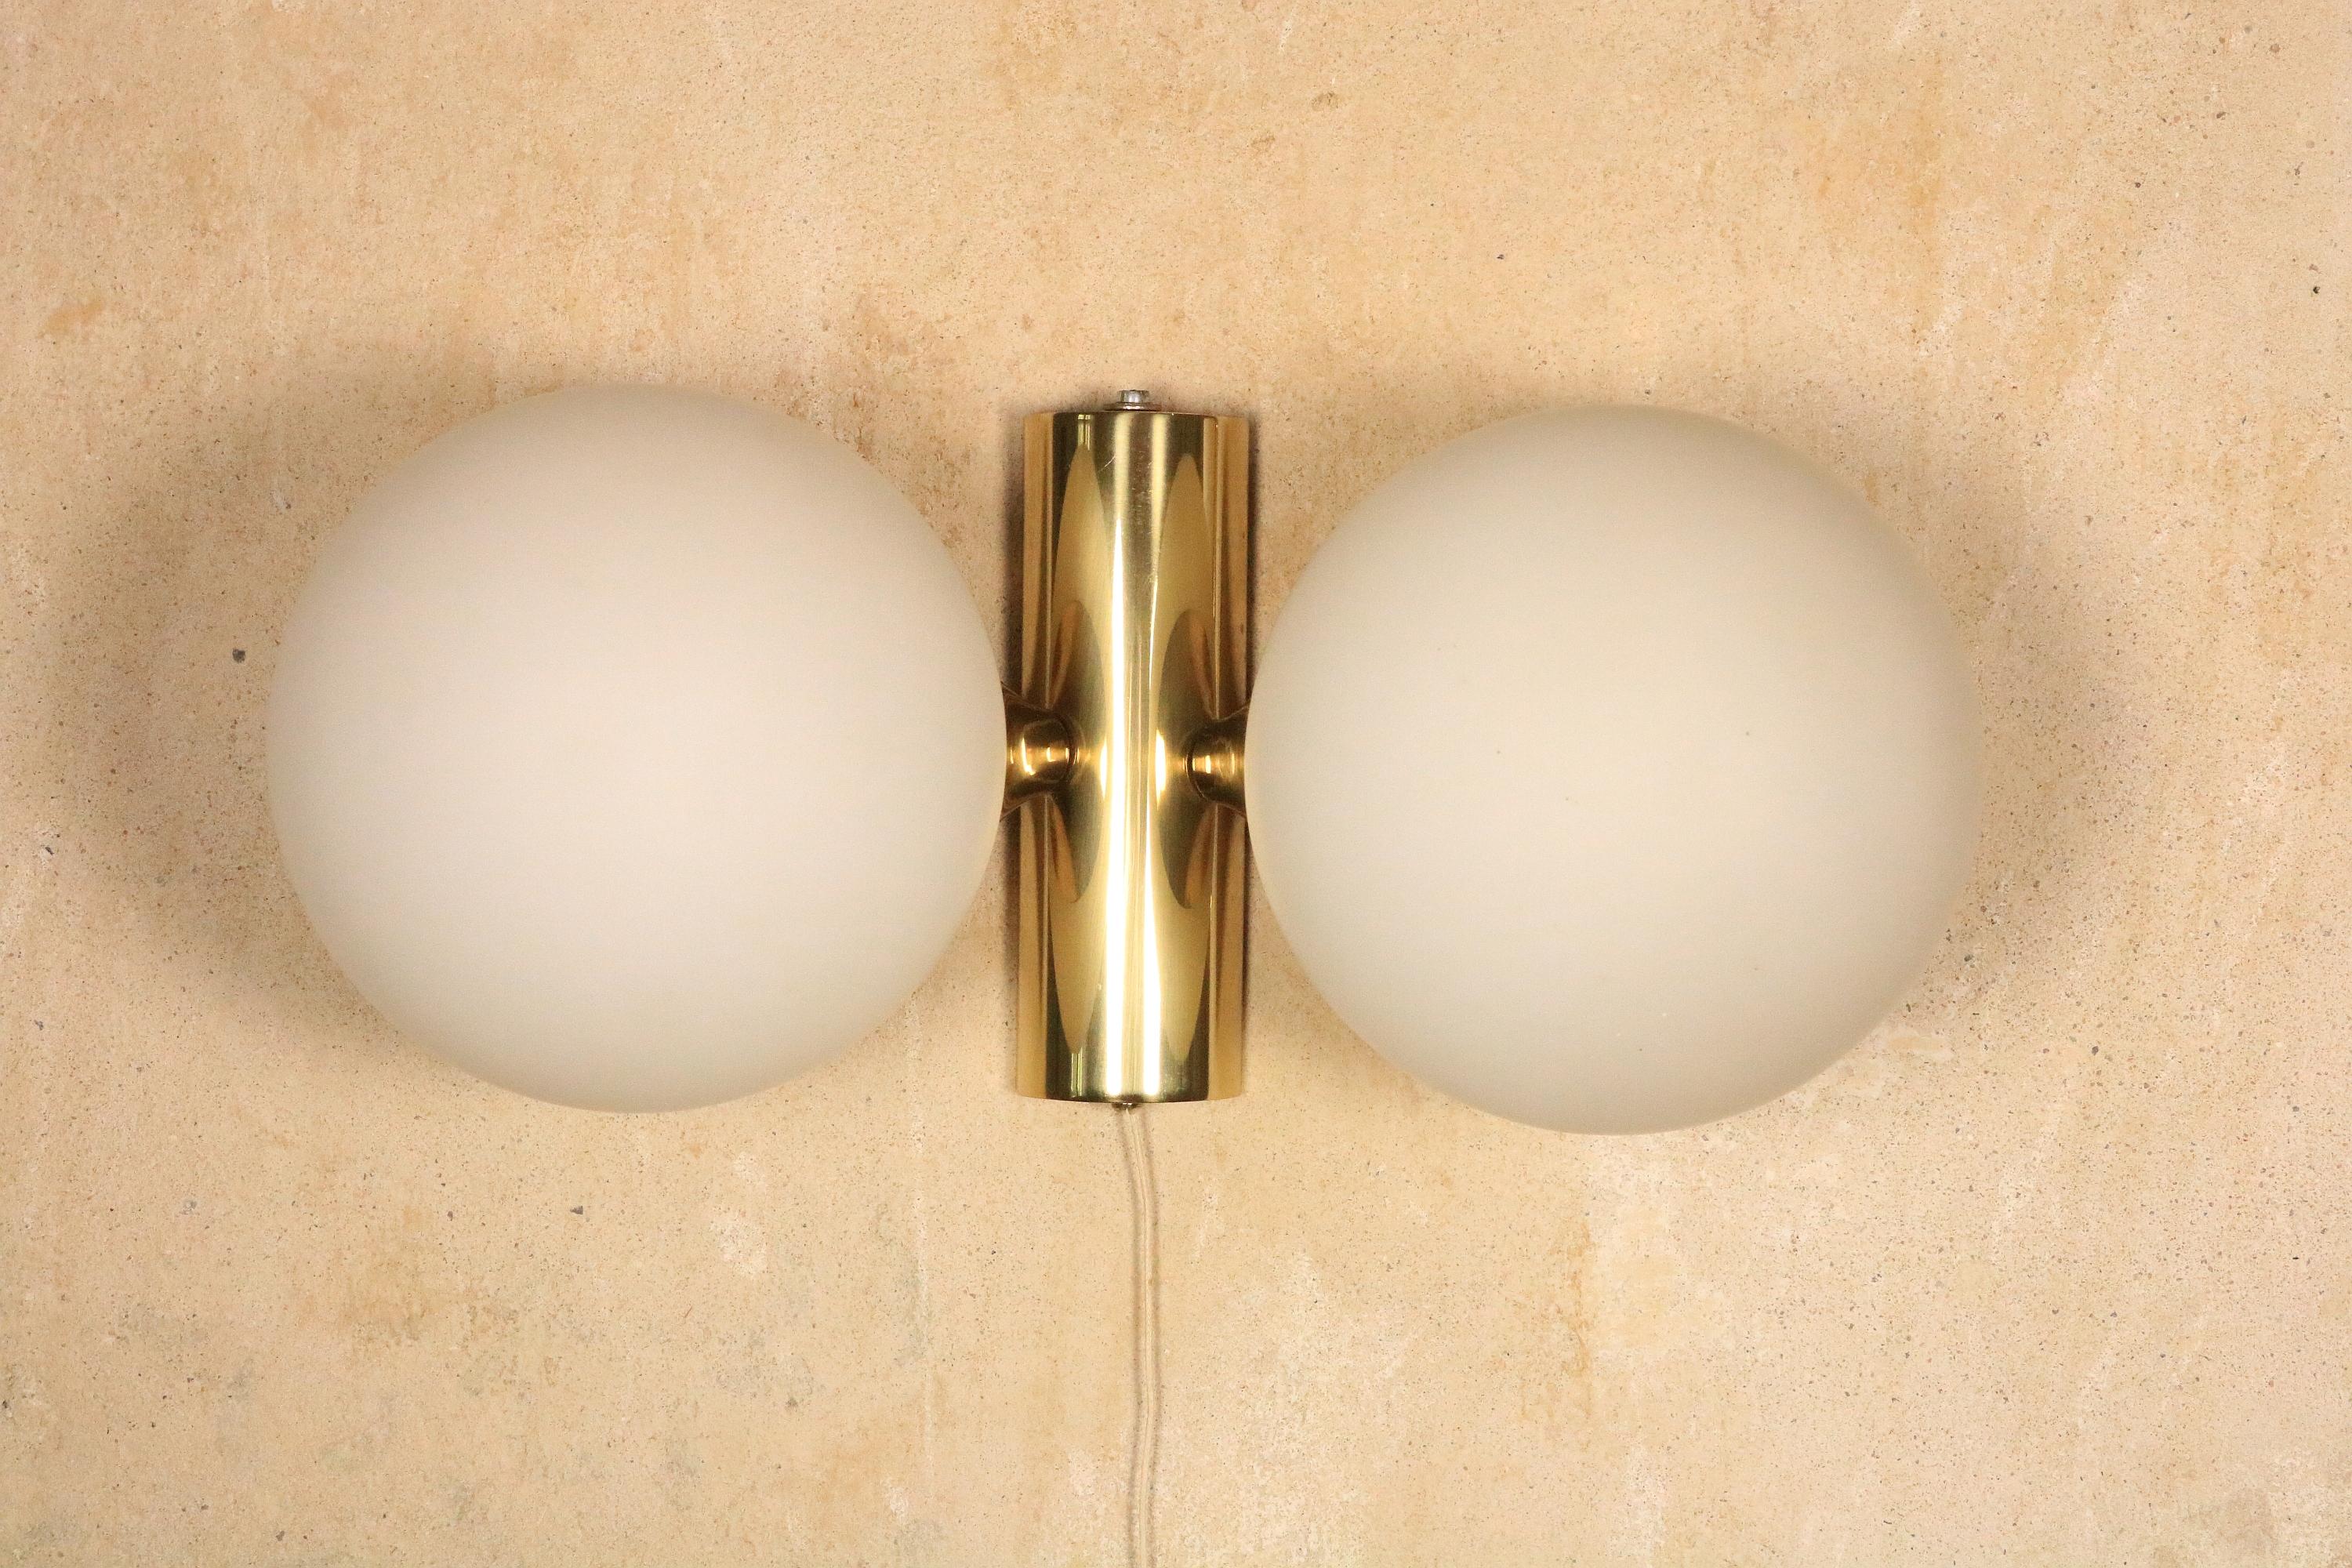 Wall lamp by Kaiser Leuchten with brass frame and two opaque glass balls.
On the photo with two lamps, only the left is avaiable.
 
Width: 33 cm / 13 inch
Depth: 15 cm / 5.9 inch
Diameter balls: 14 cm / 5.5 inch
 
Matching small Sputnik light